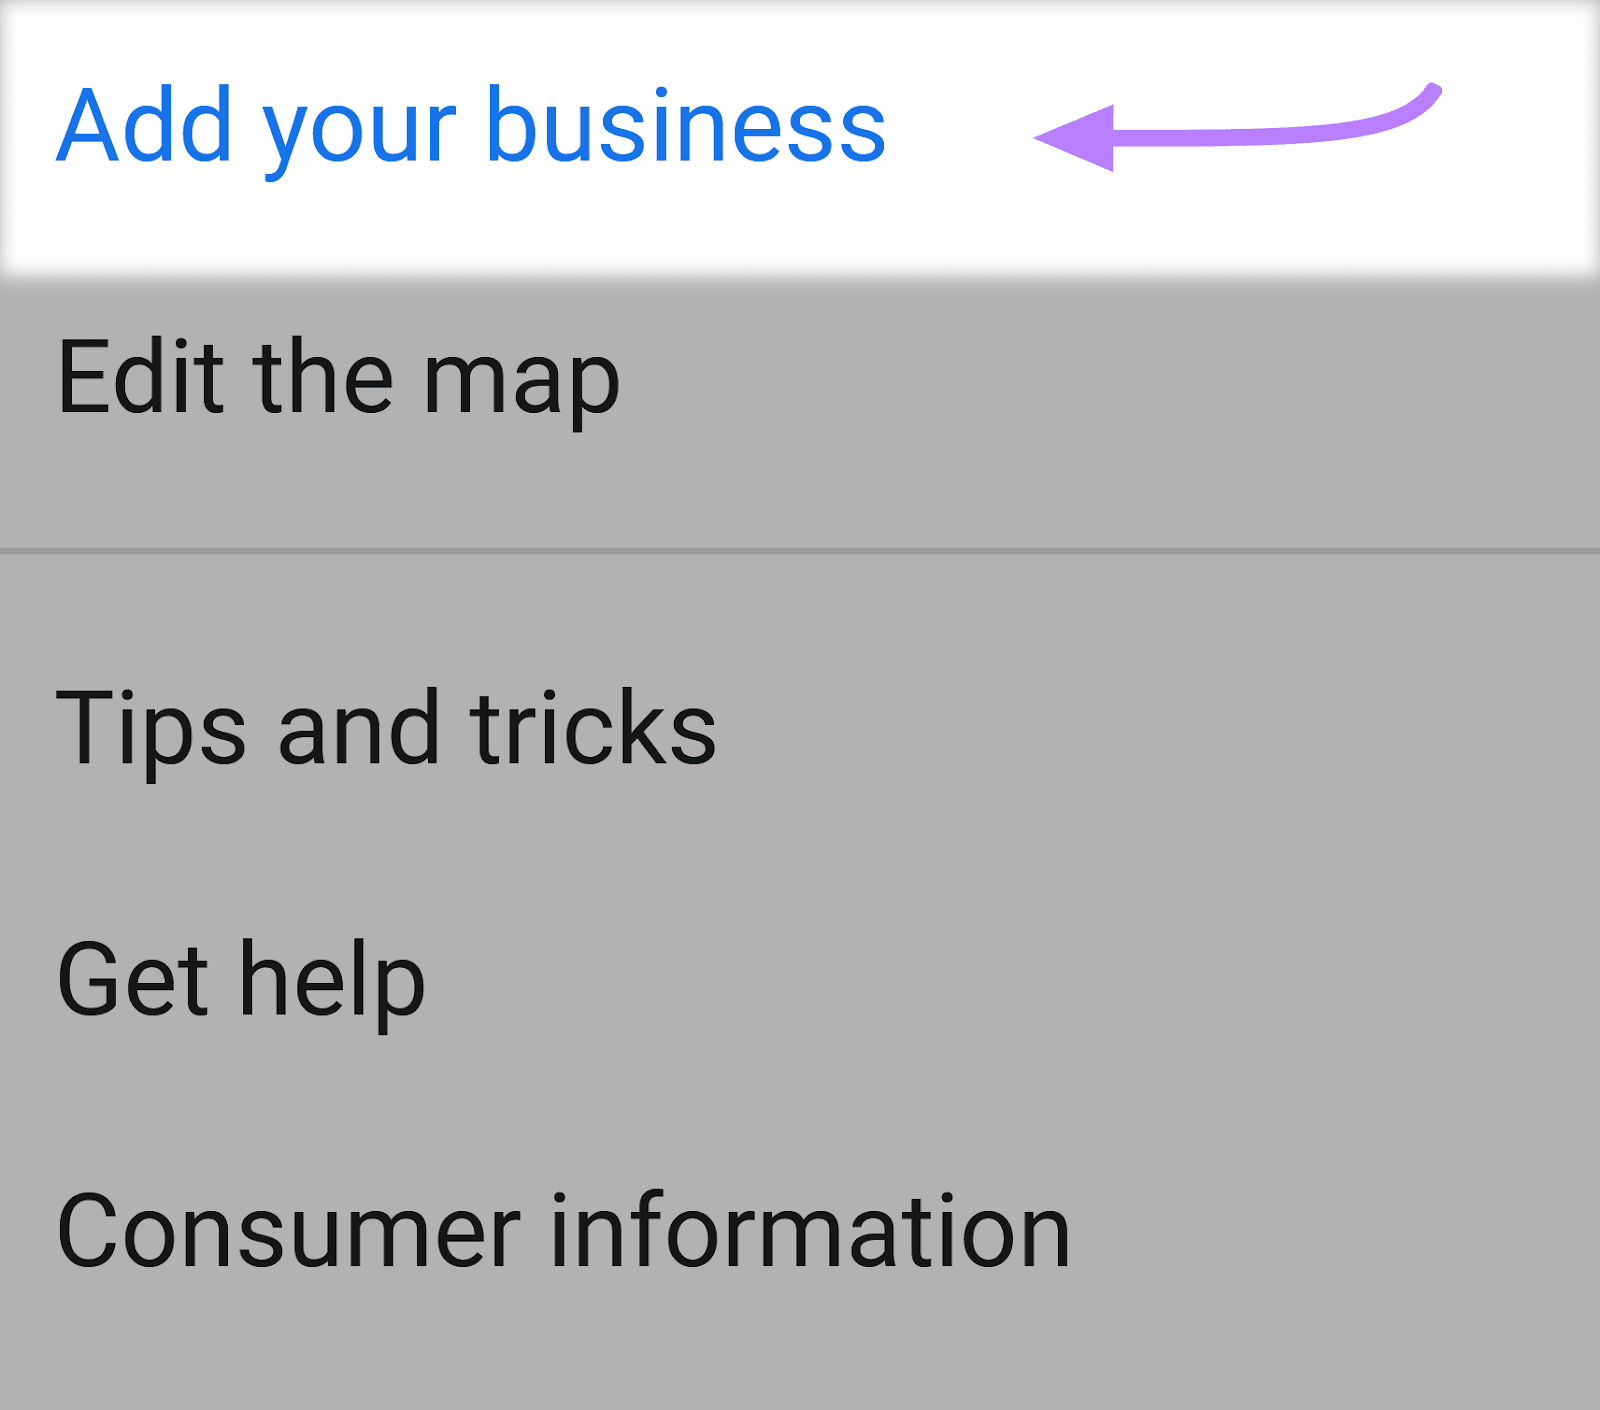 "Add your business" enactment    highlighted successful  Google Maps menu